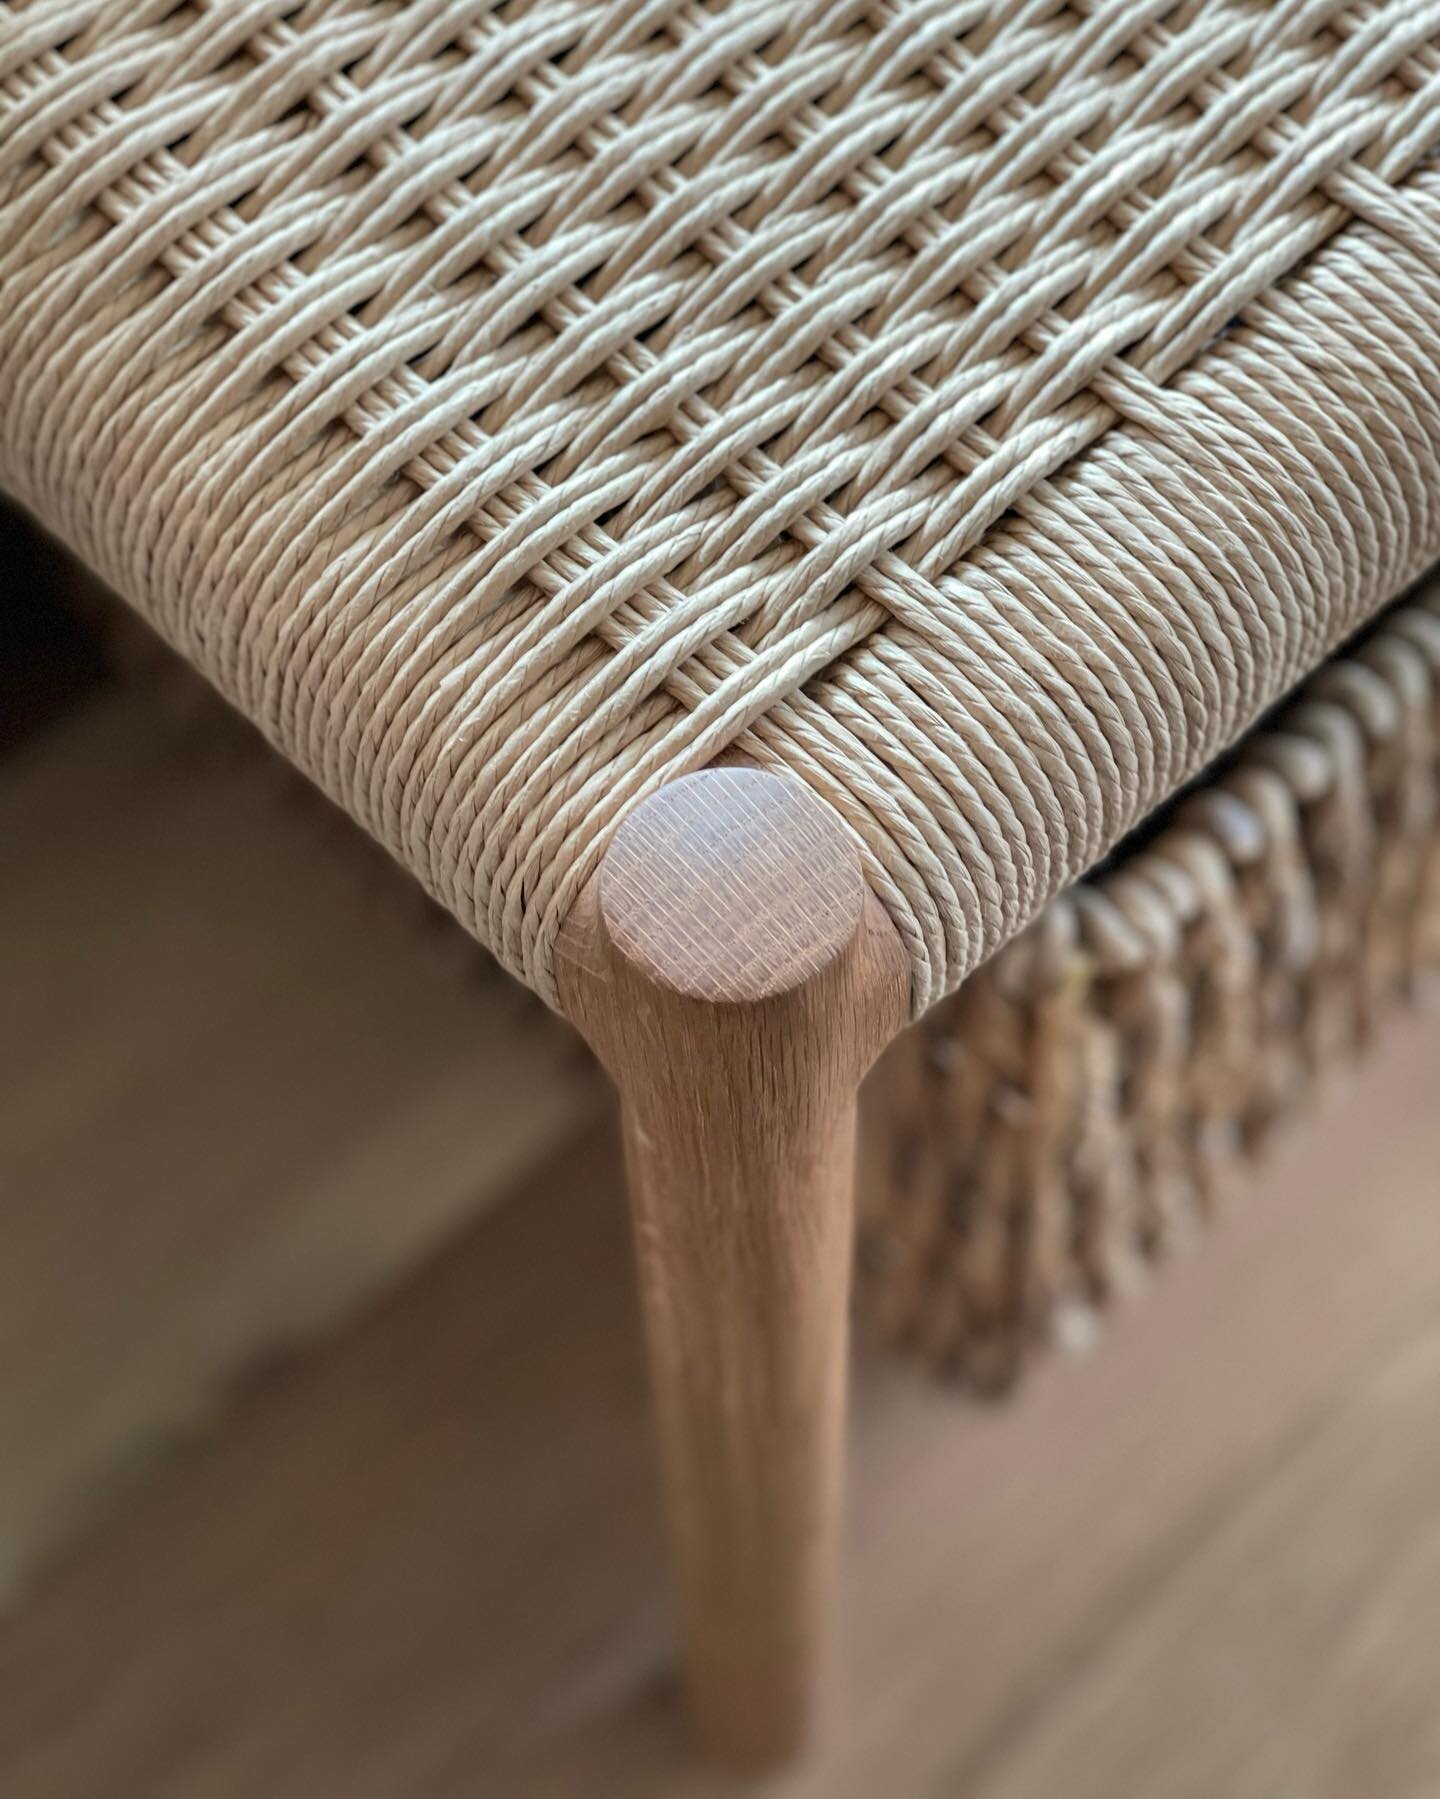 Danish cord bench with a flat weave pattern never gets old. 

I designed this type of bench for my own entry way about 12 years ago. It&rsquo;s still one of my favorites. 

One available in white oak in my shop. Click through to website to see sale p